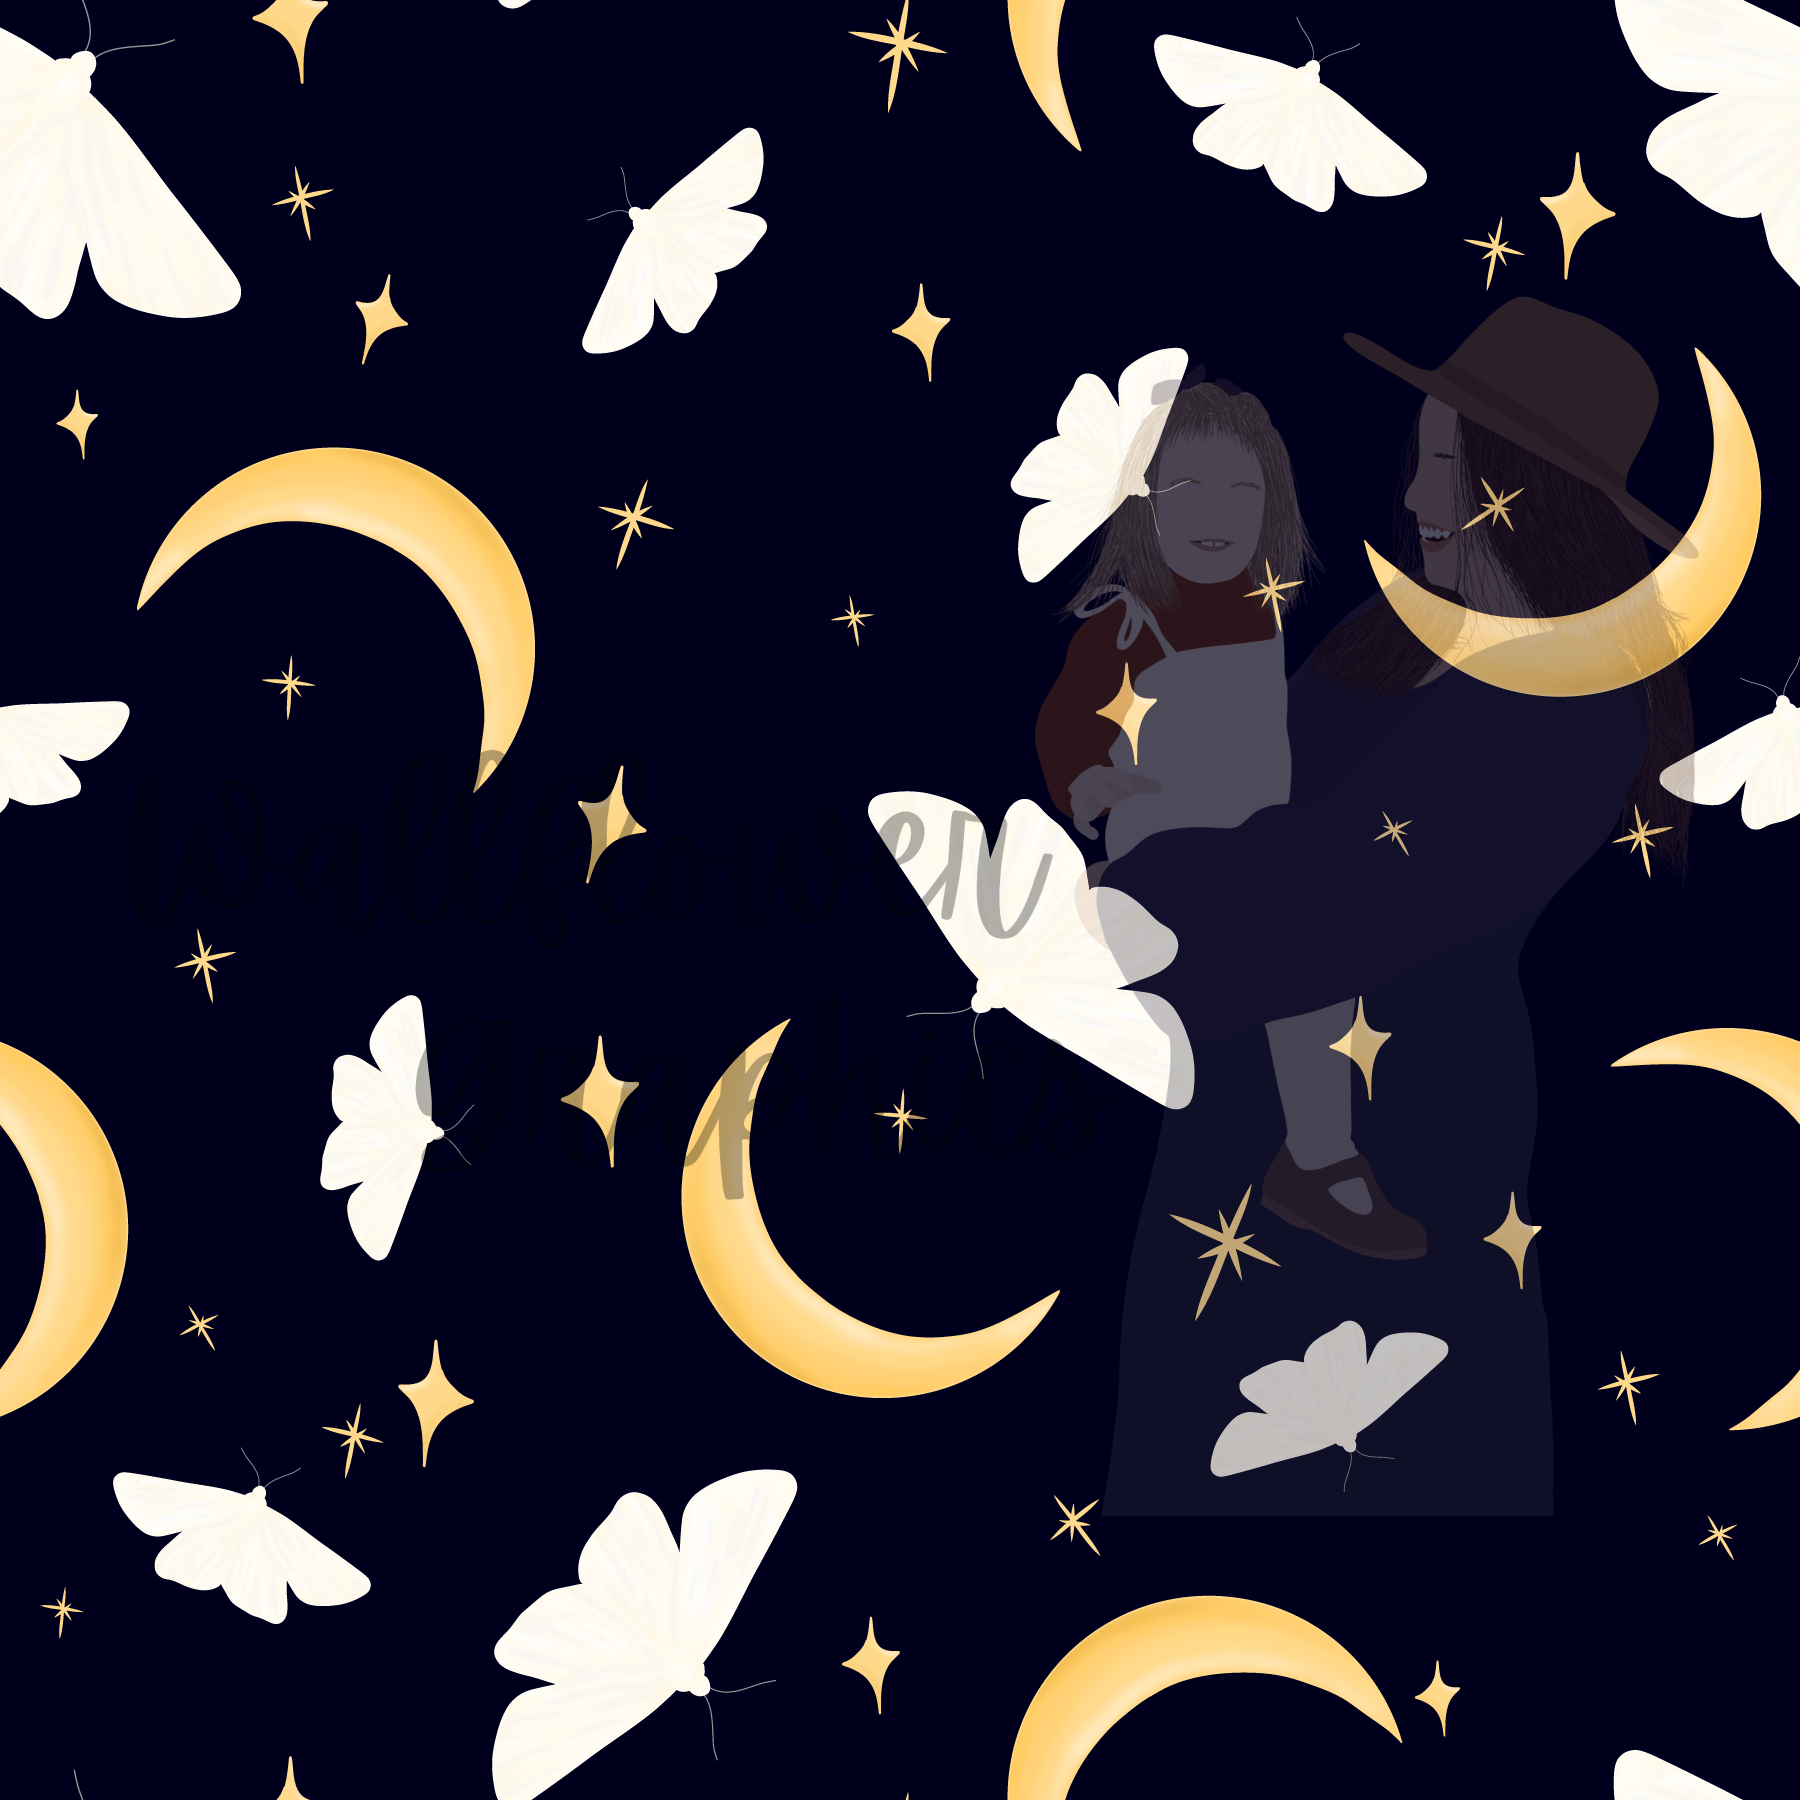 Moths and Moons